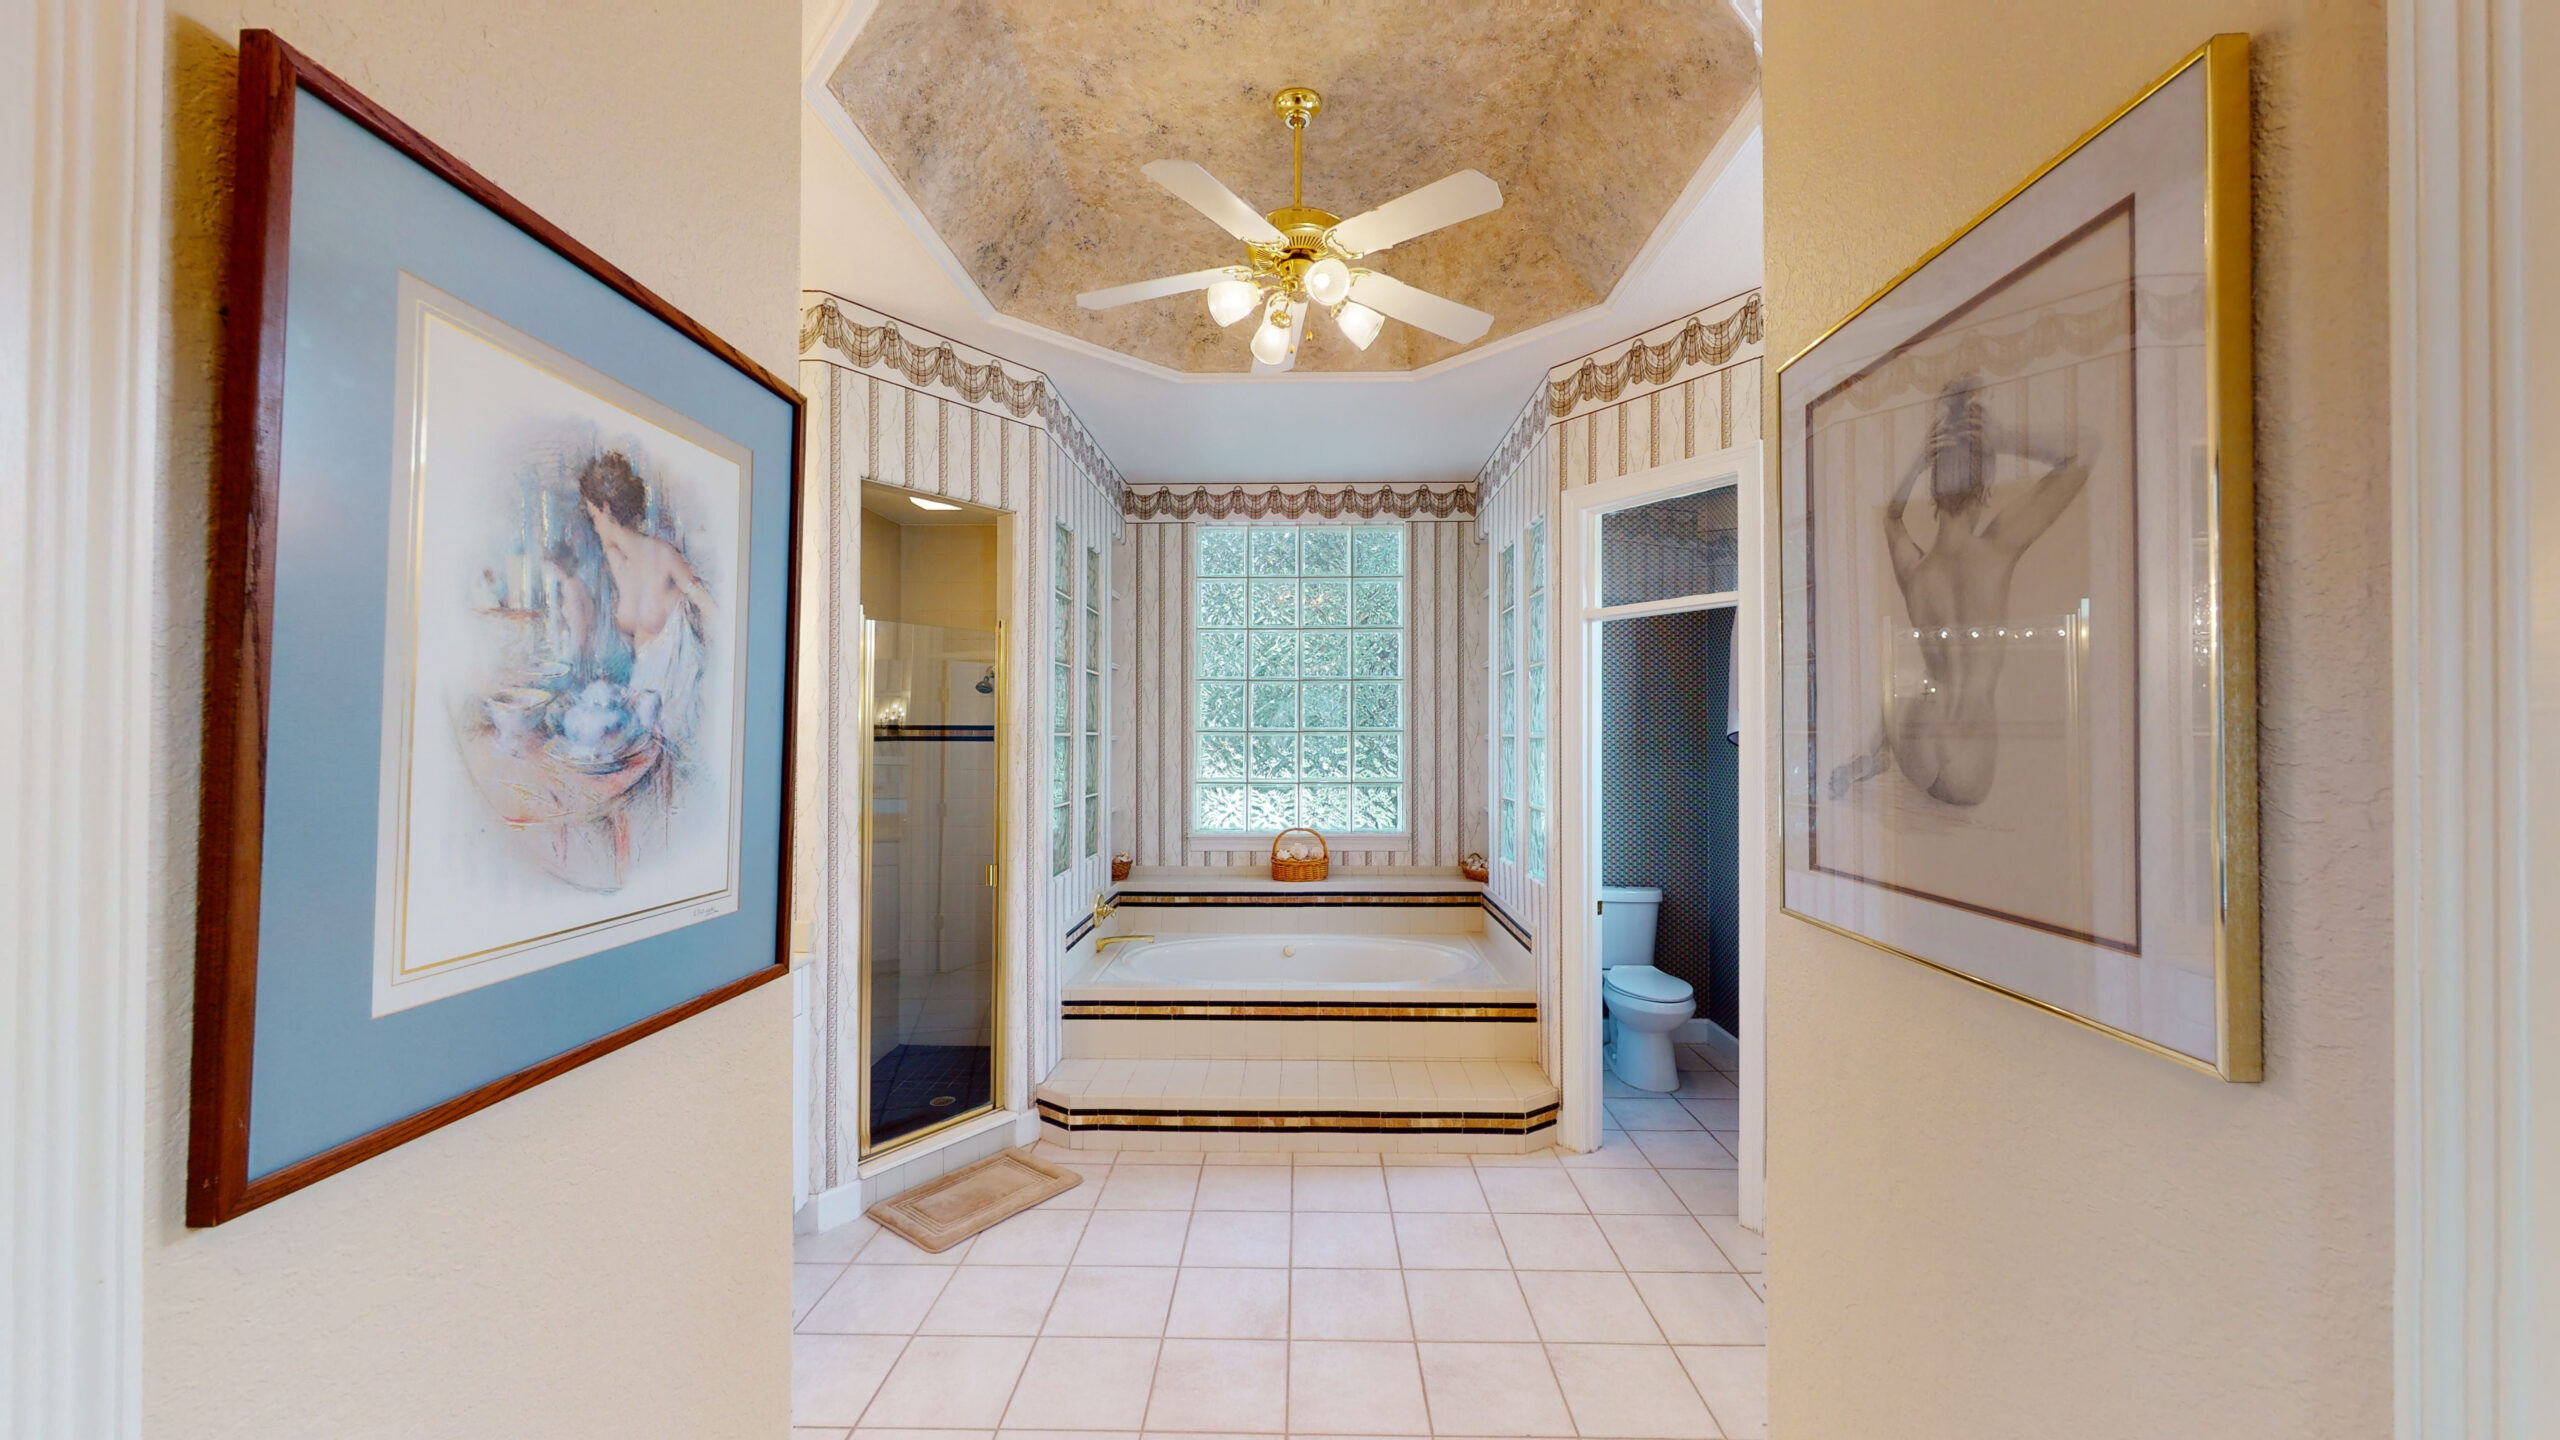 A white bathroom with framed drawings